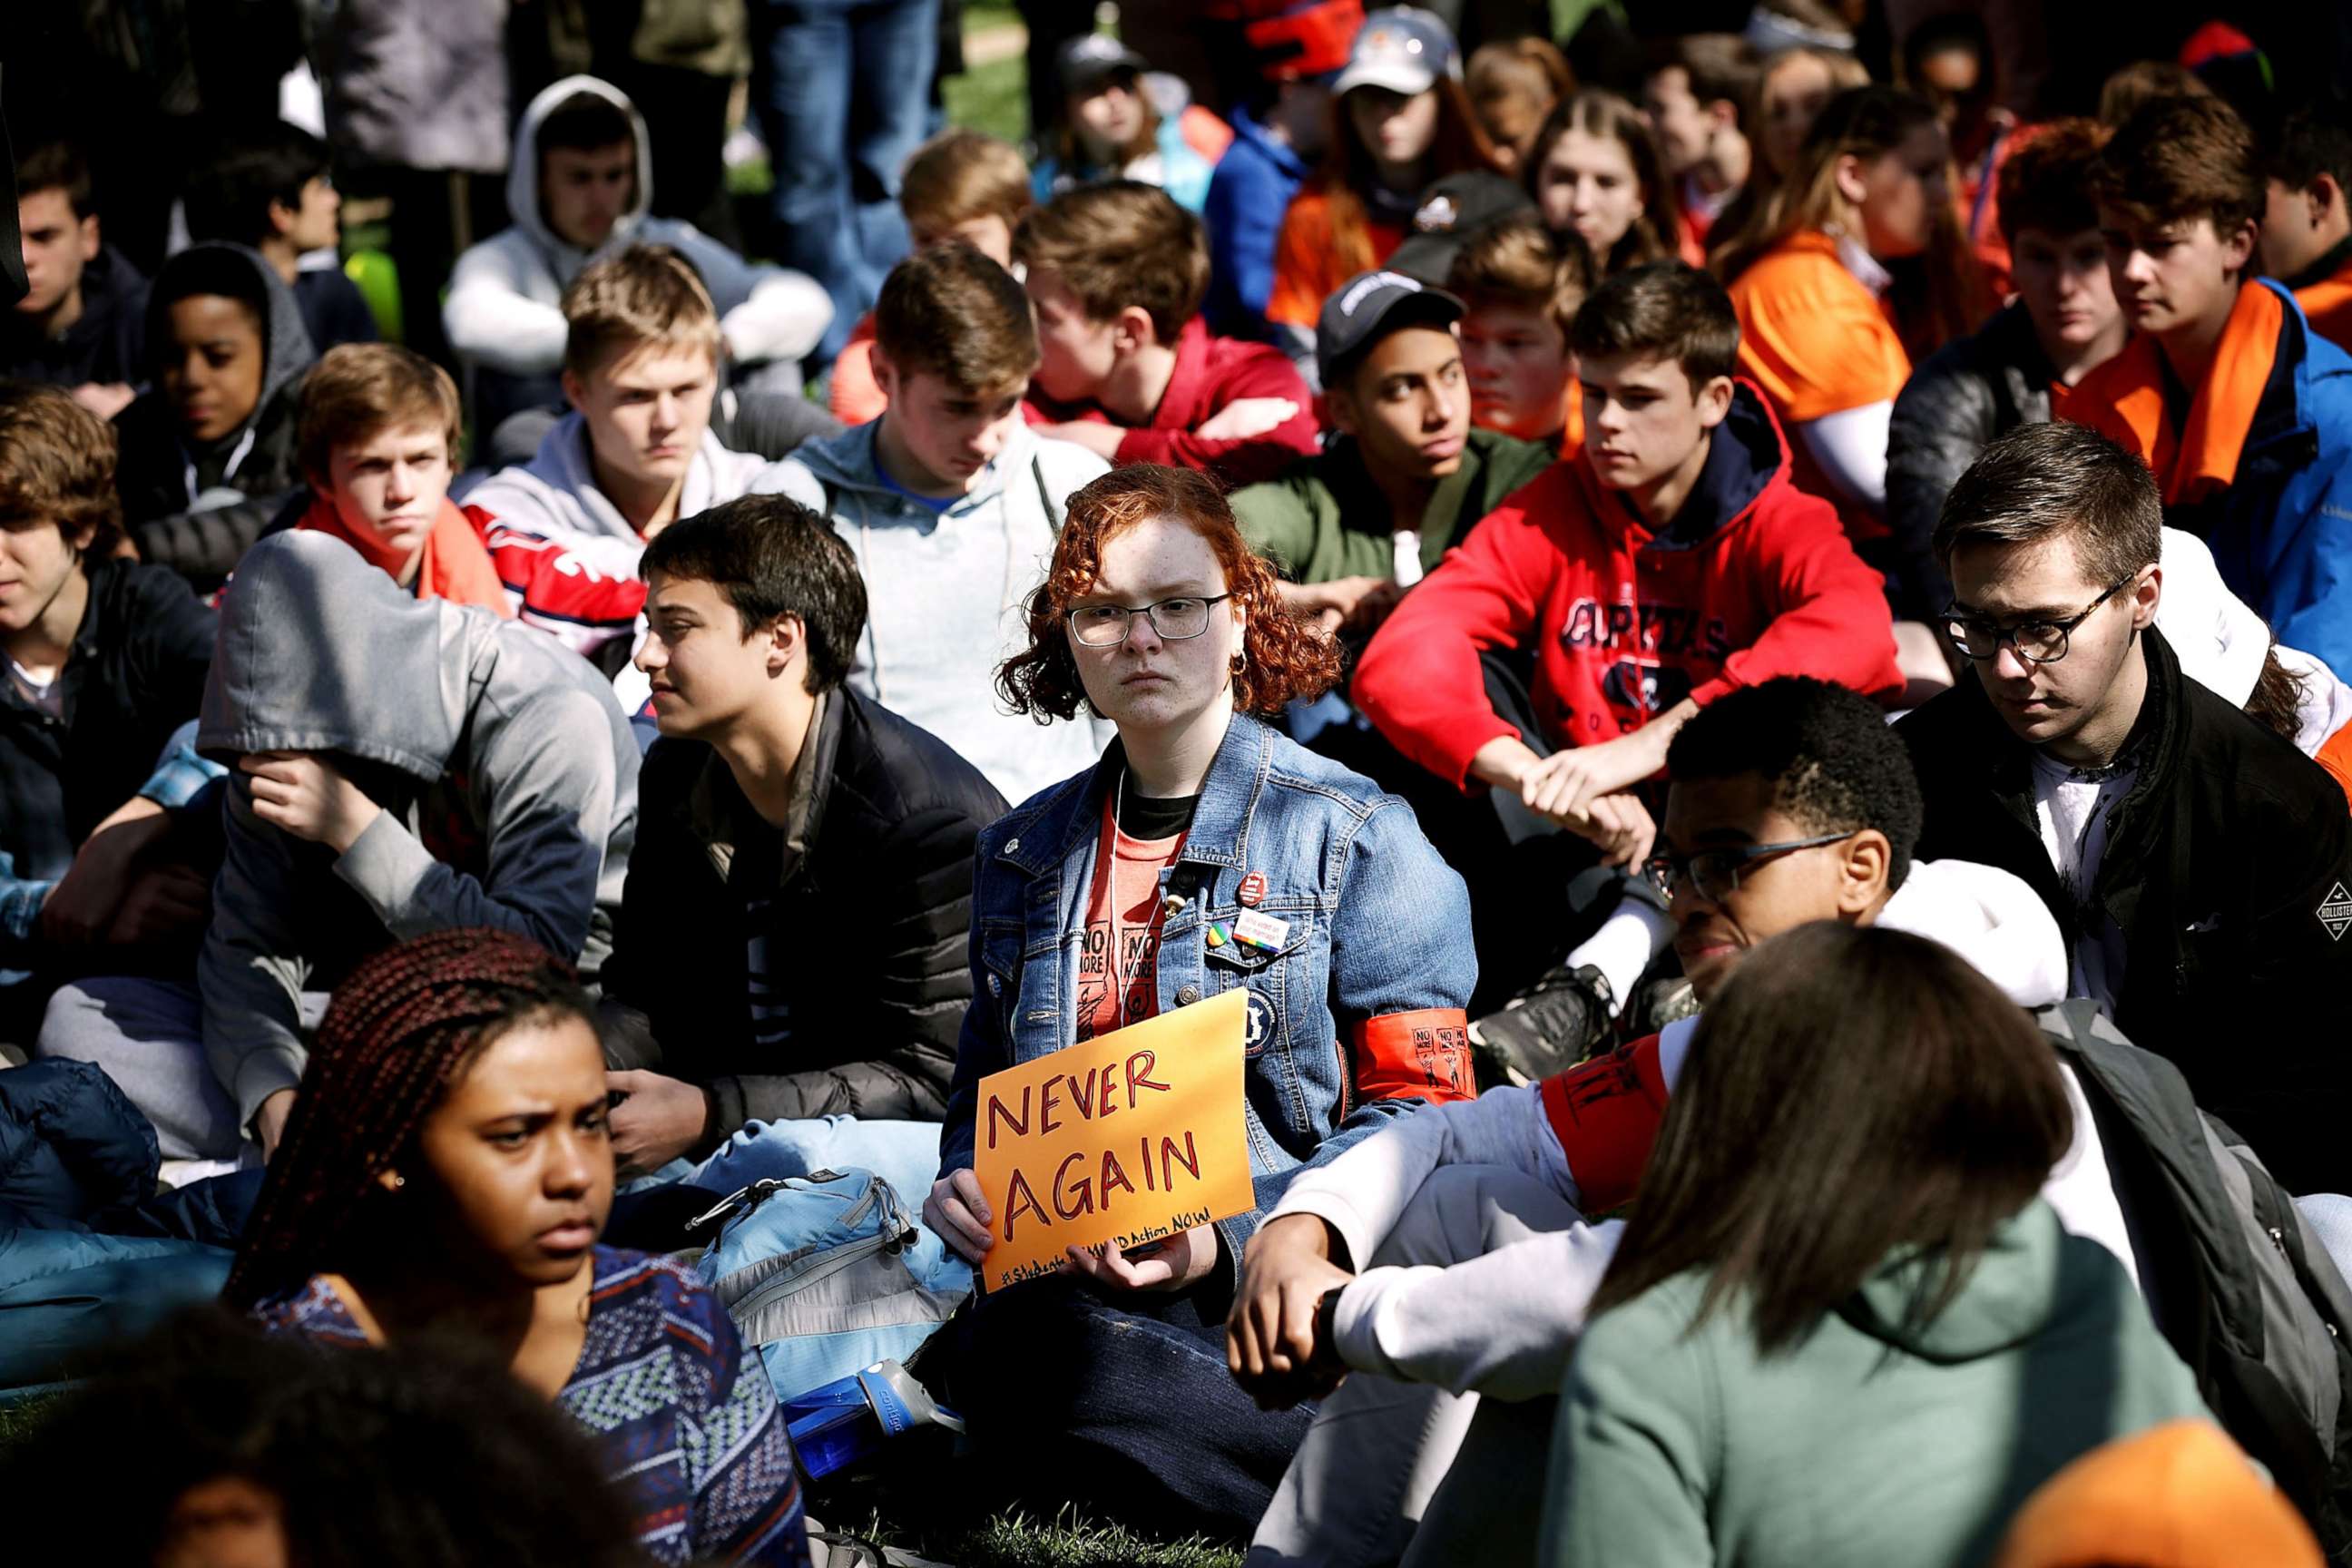 PHOTO: Several hundred high school students from the Washington area observe 19 minutes of silence while rallying in front of the White House, April 20, 2018, in Washington, D.C. 